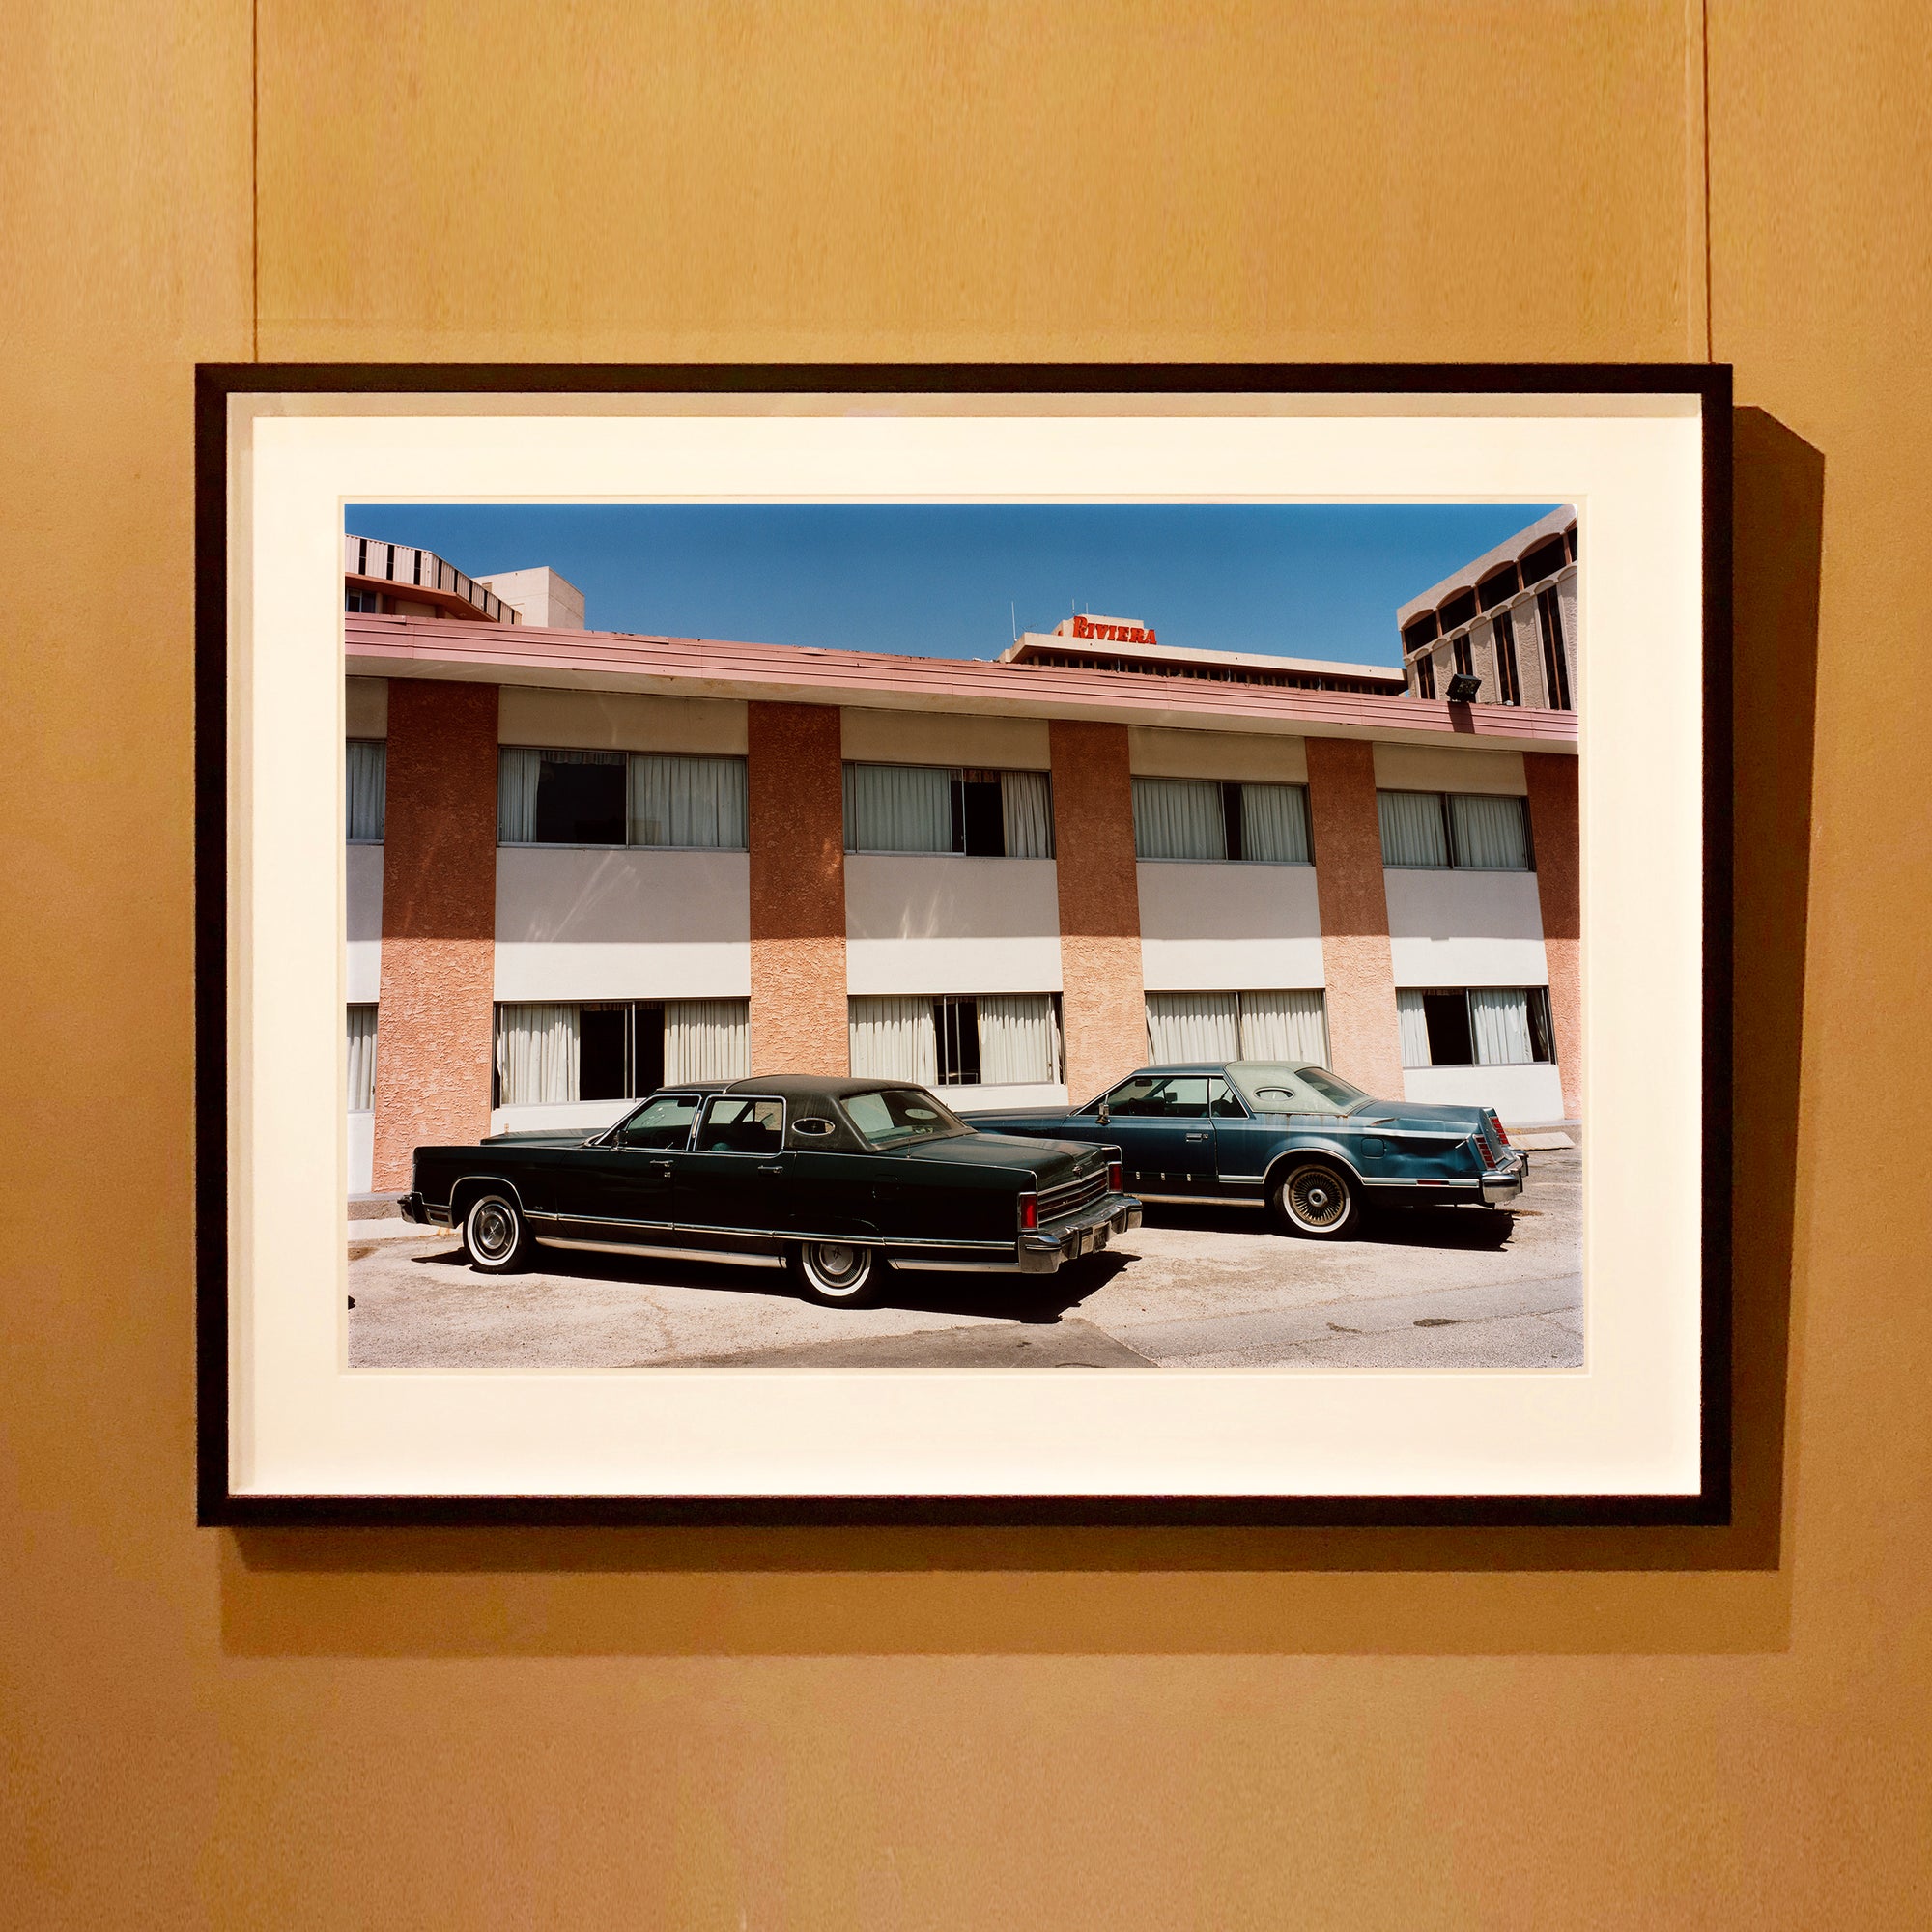 Black framed photograph by Richard Heeps. Hanging on the wall, this retro photograph has two classic Lincoln cars parked outside a hotel in Las Vegas. 